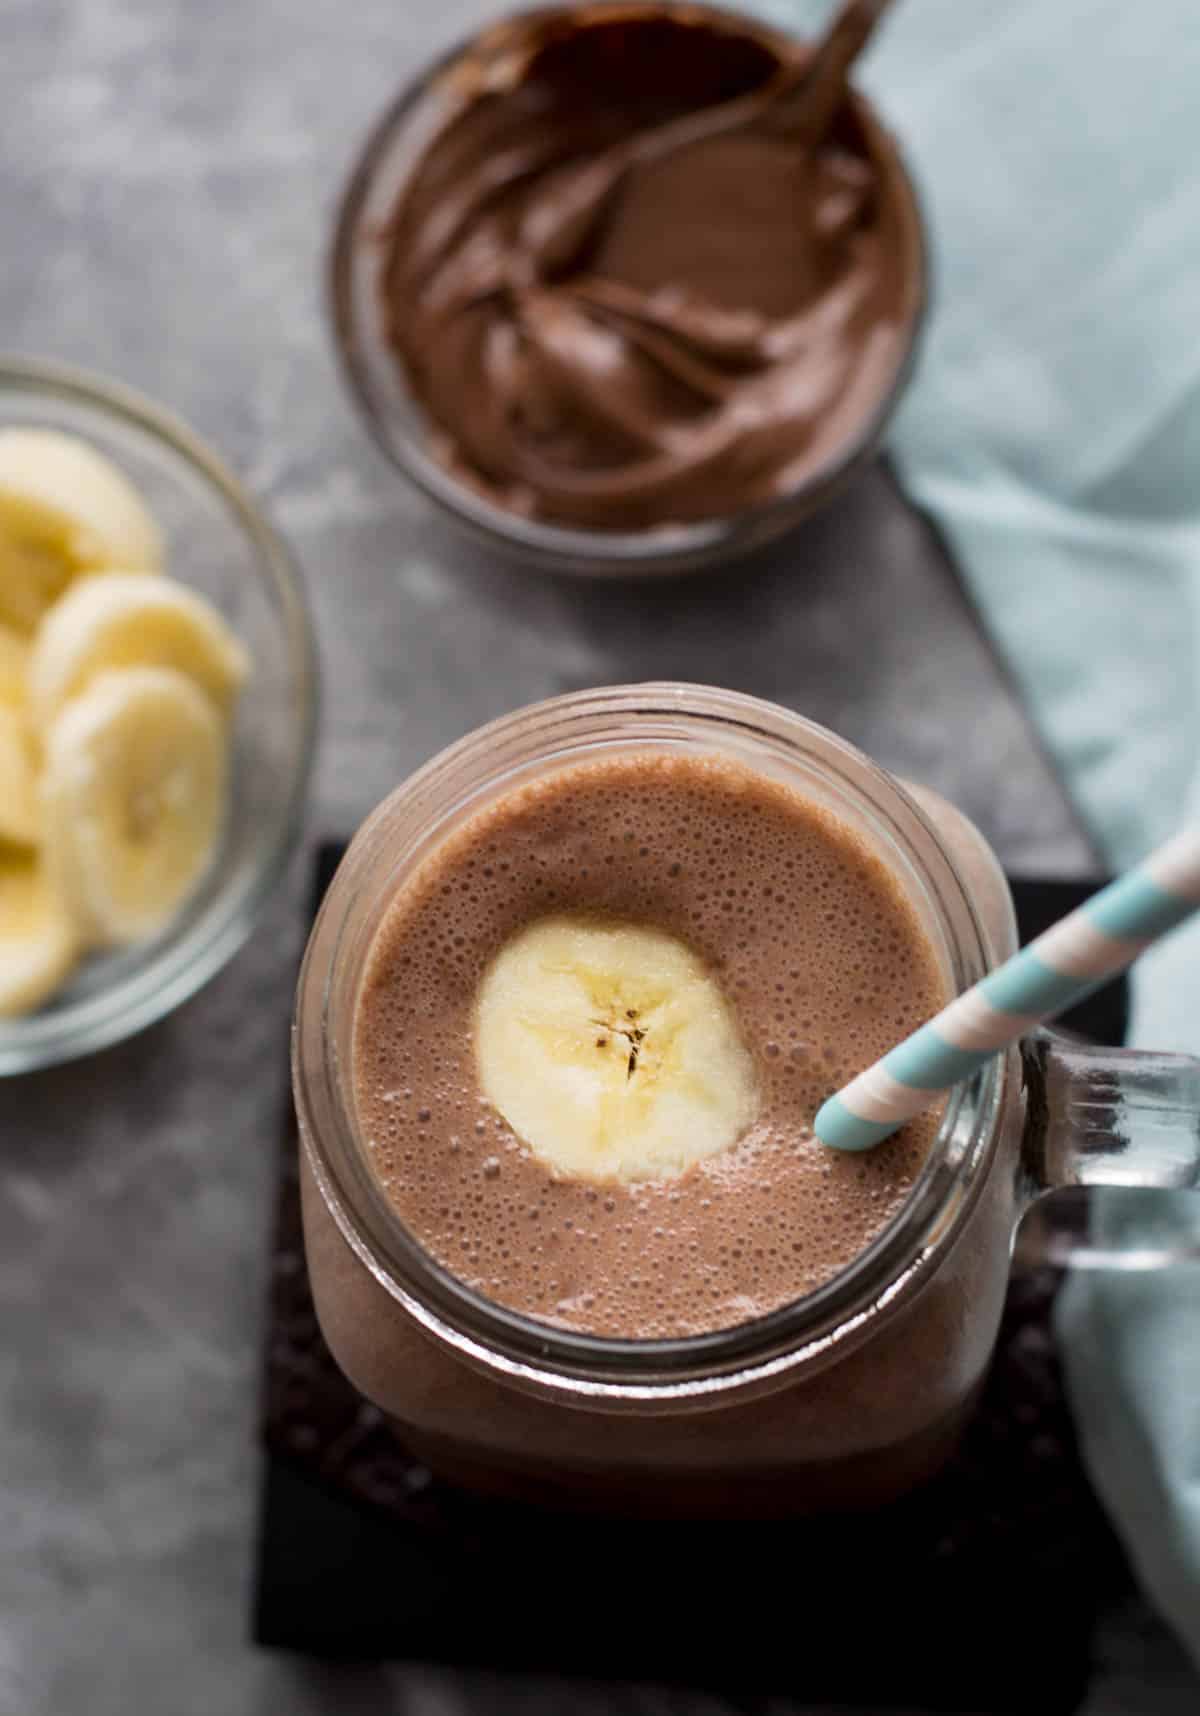 Make Your Kids Smile With the Best Banana Nutella Smoothie Recipe